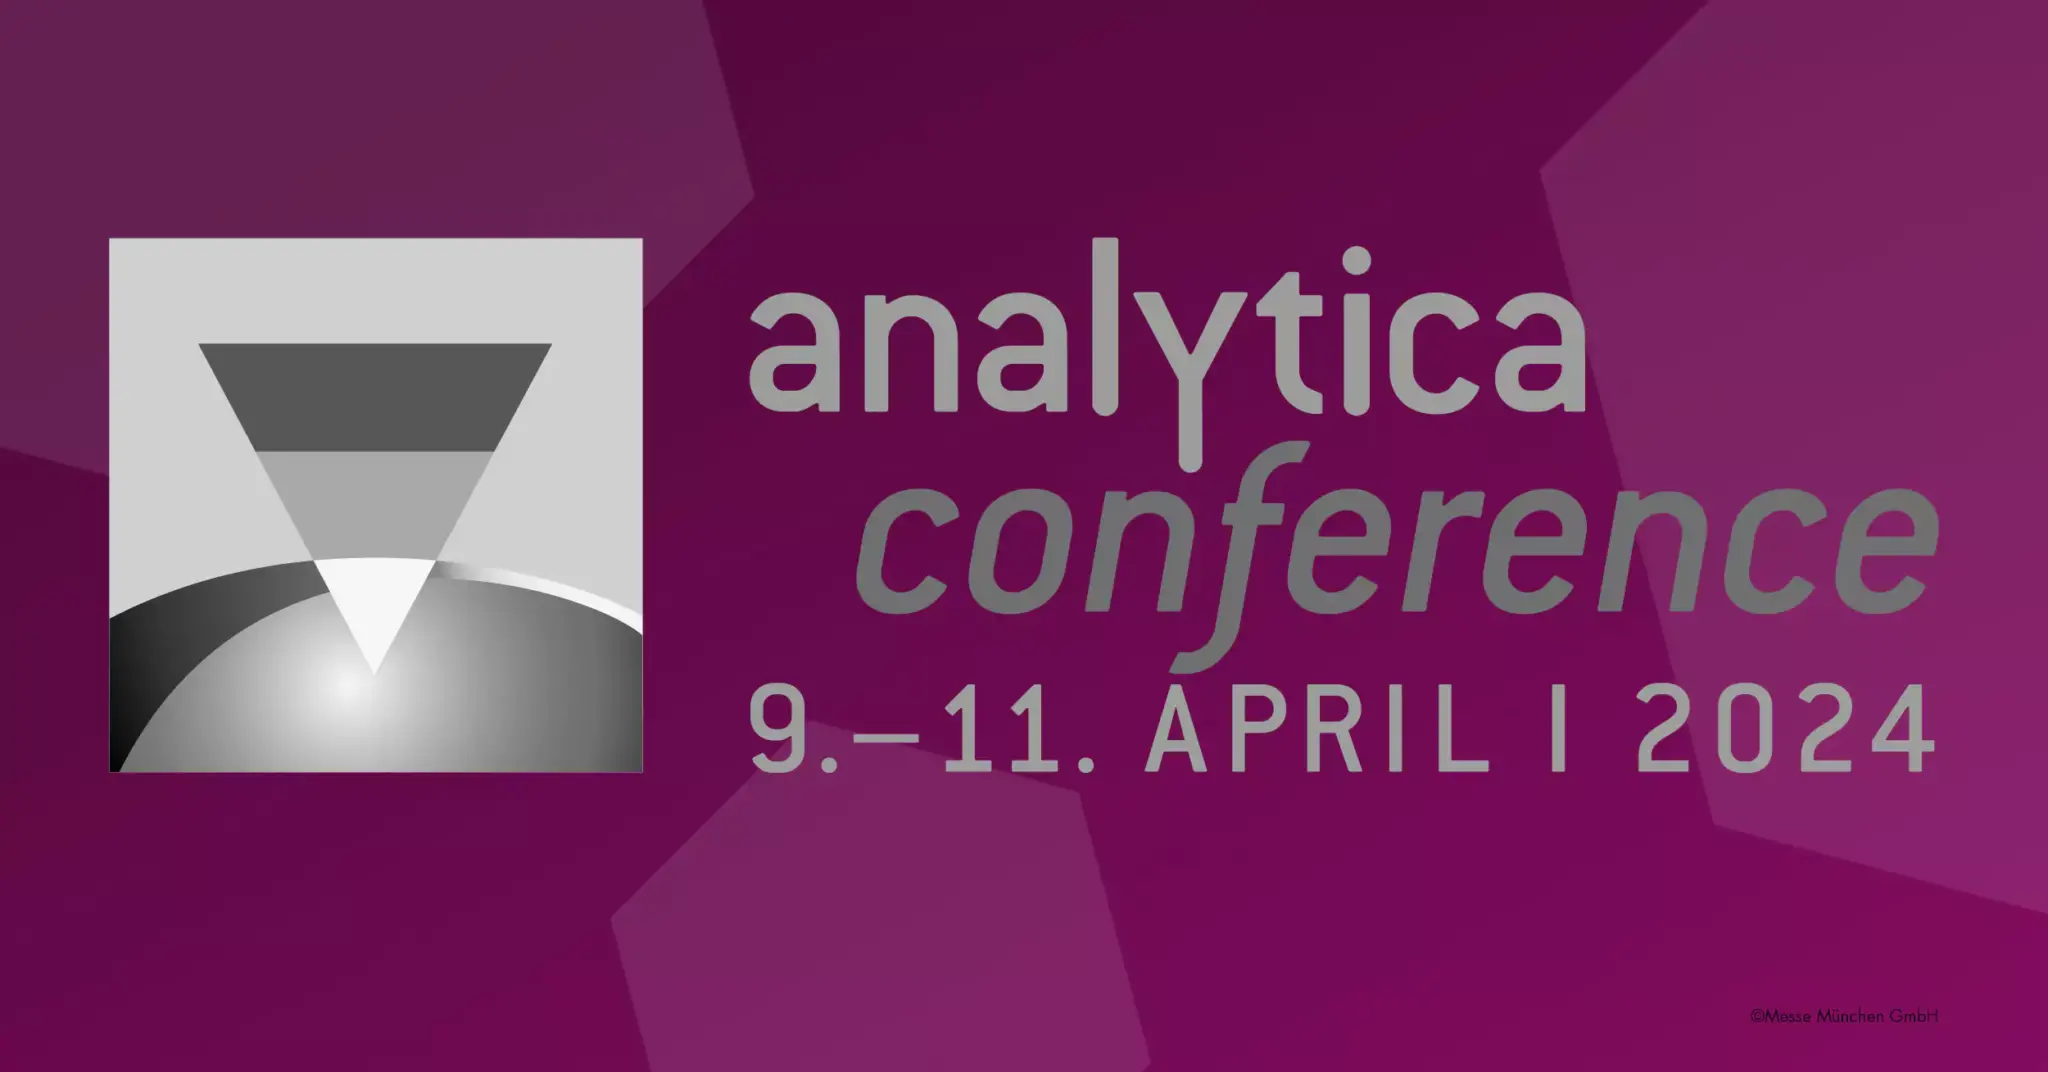 NLIR will participate in Analytica conference in Munich 9-12 April, 2024